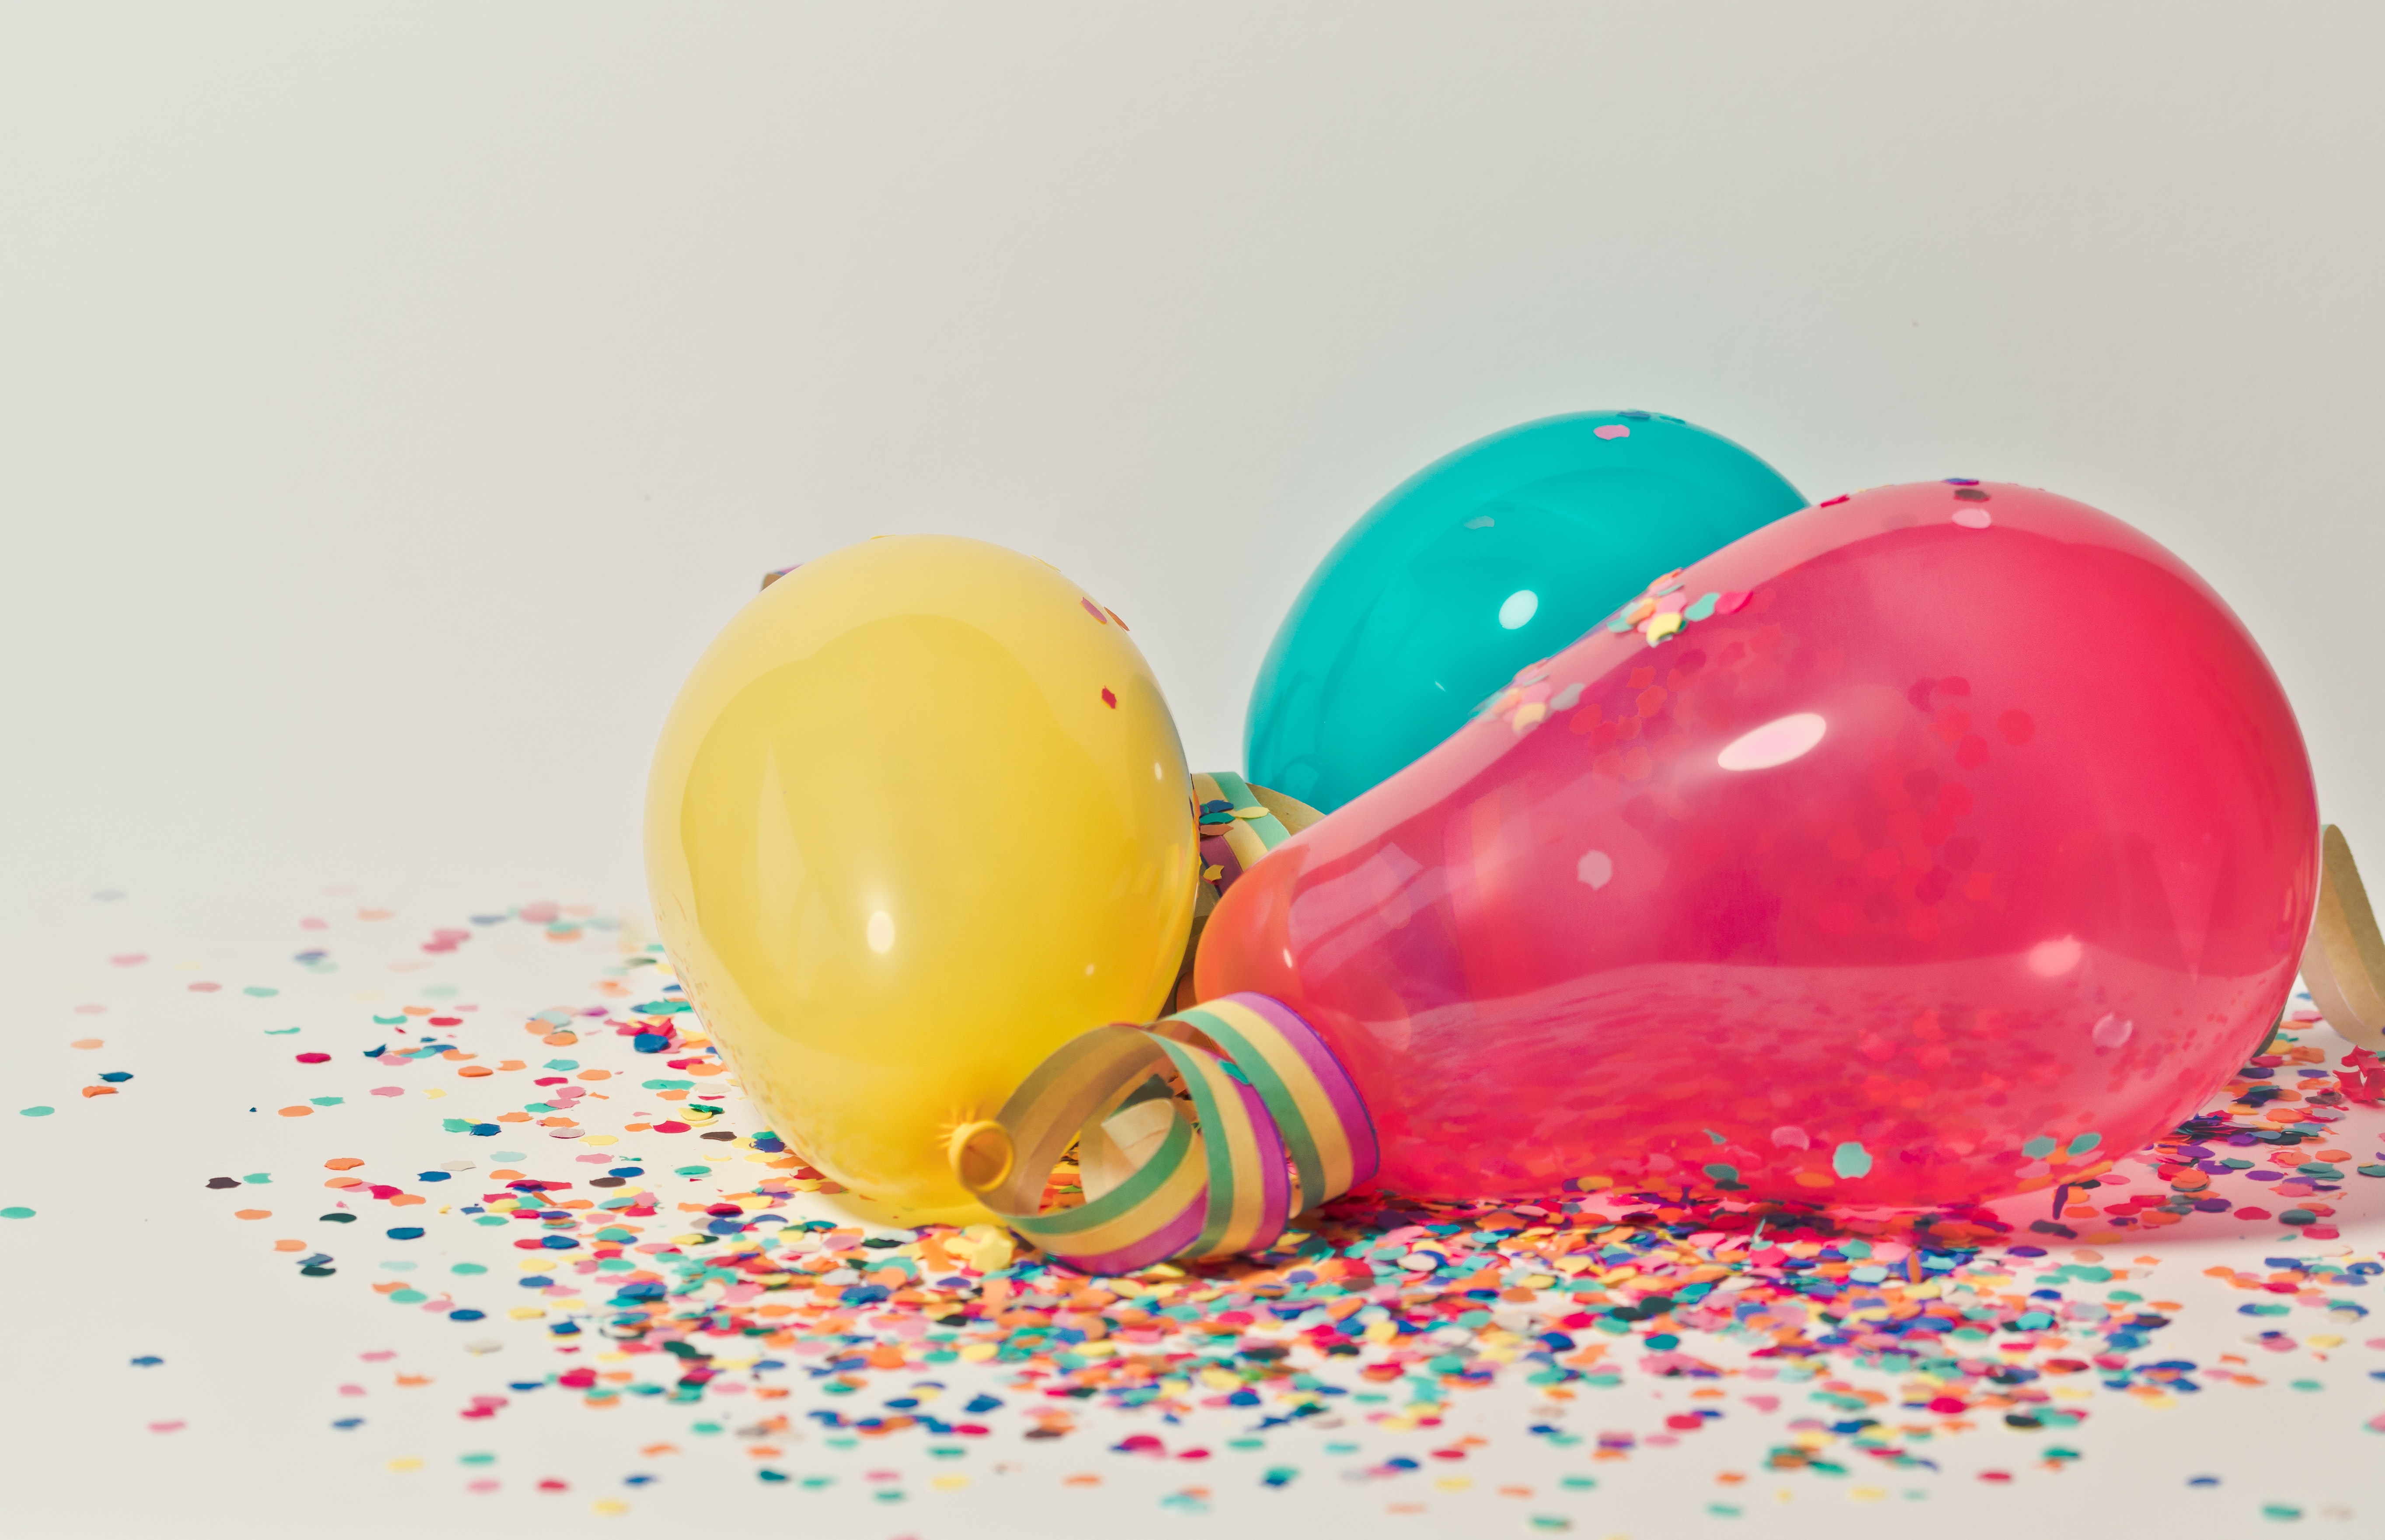 yellow-pink-and-blue-party-balloons-796606